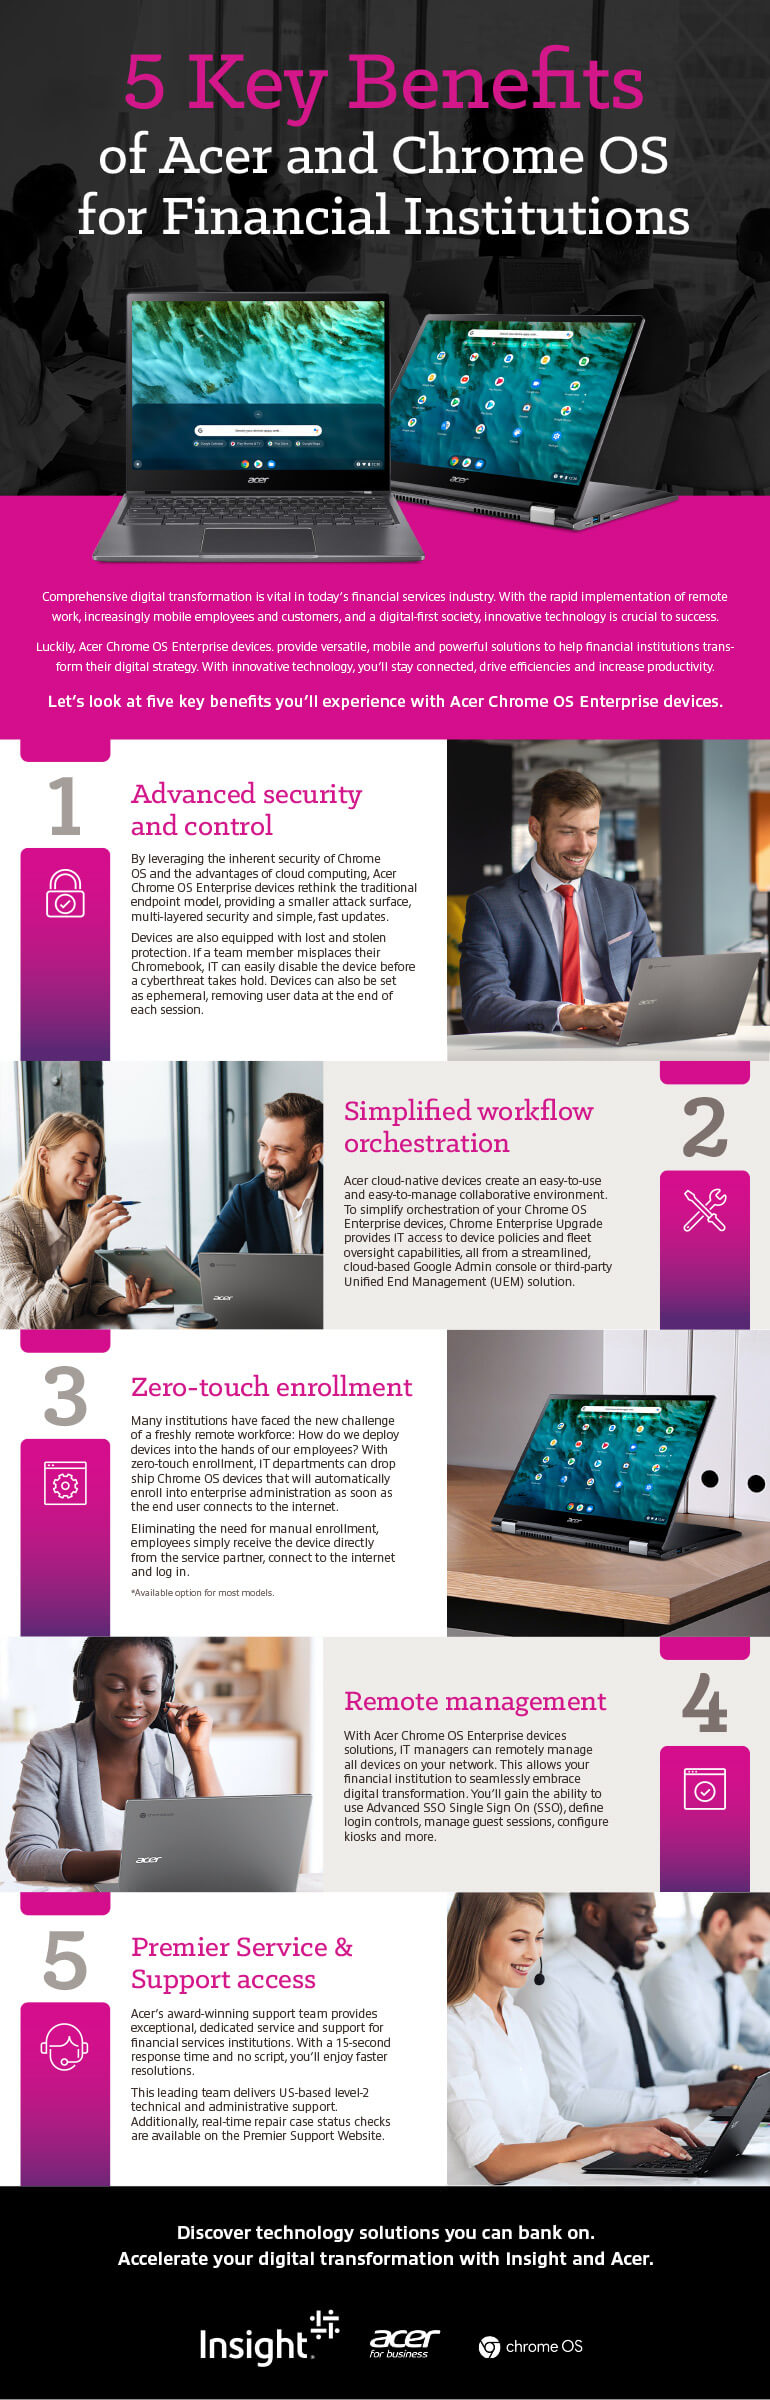 Thumbnail image of 5 Key Benefits of Acer Chrome OS for Financial Institutions infographic transcribed below